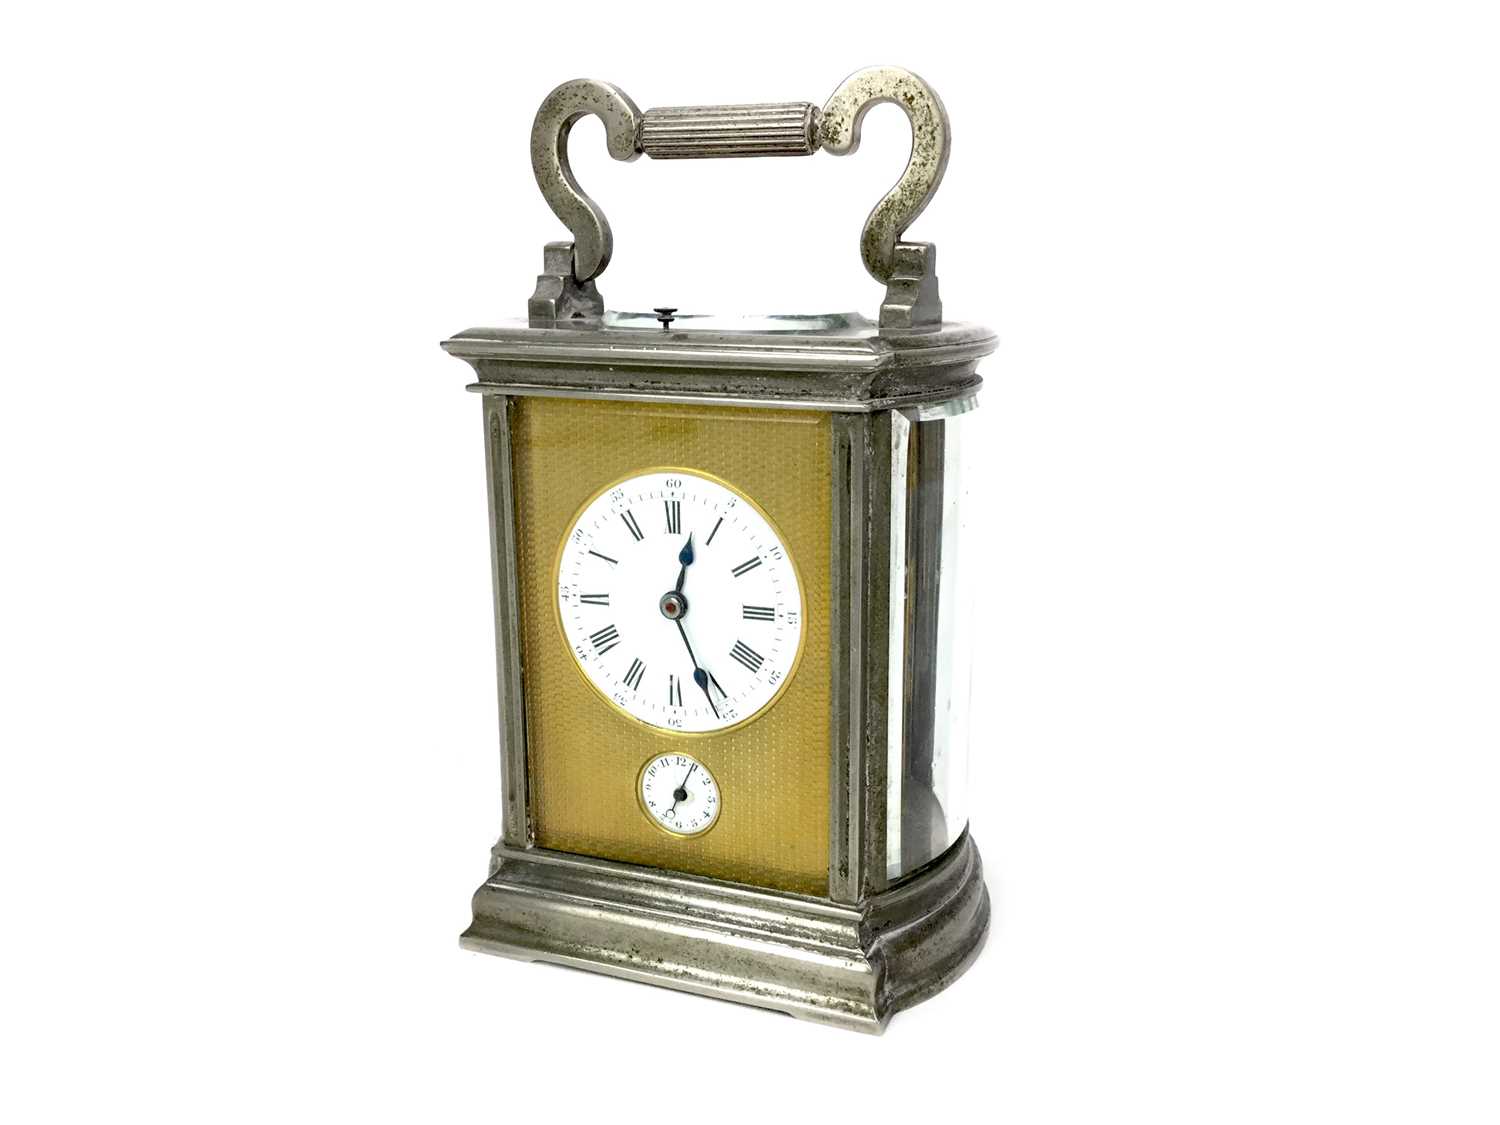 Lot 1163 - A 19TH CENTURY FRENCH REPEATER CARRIAGE CLOCK